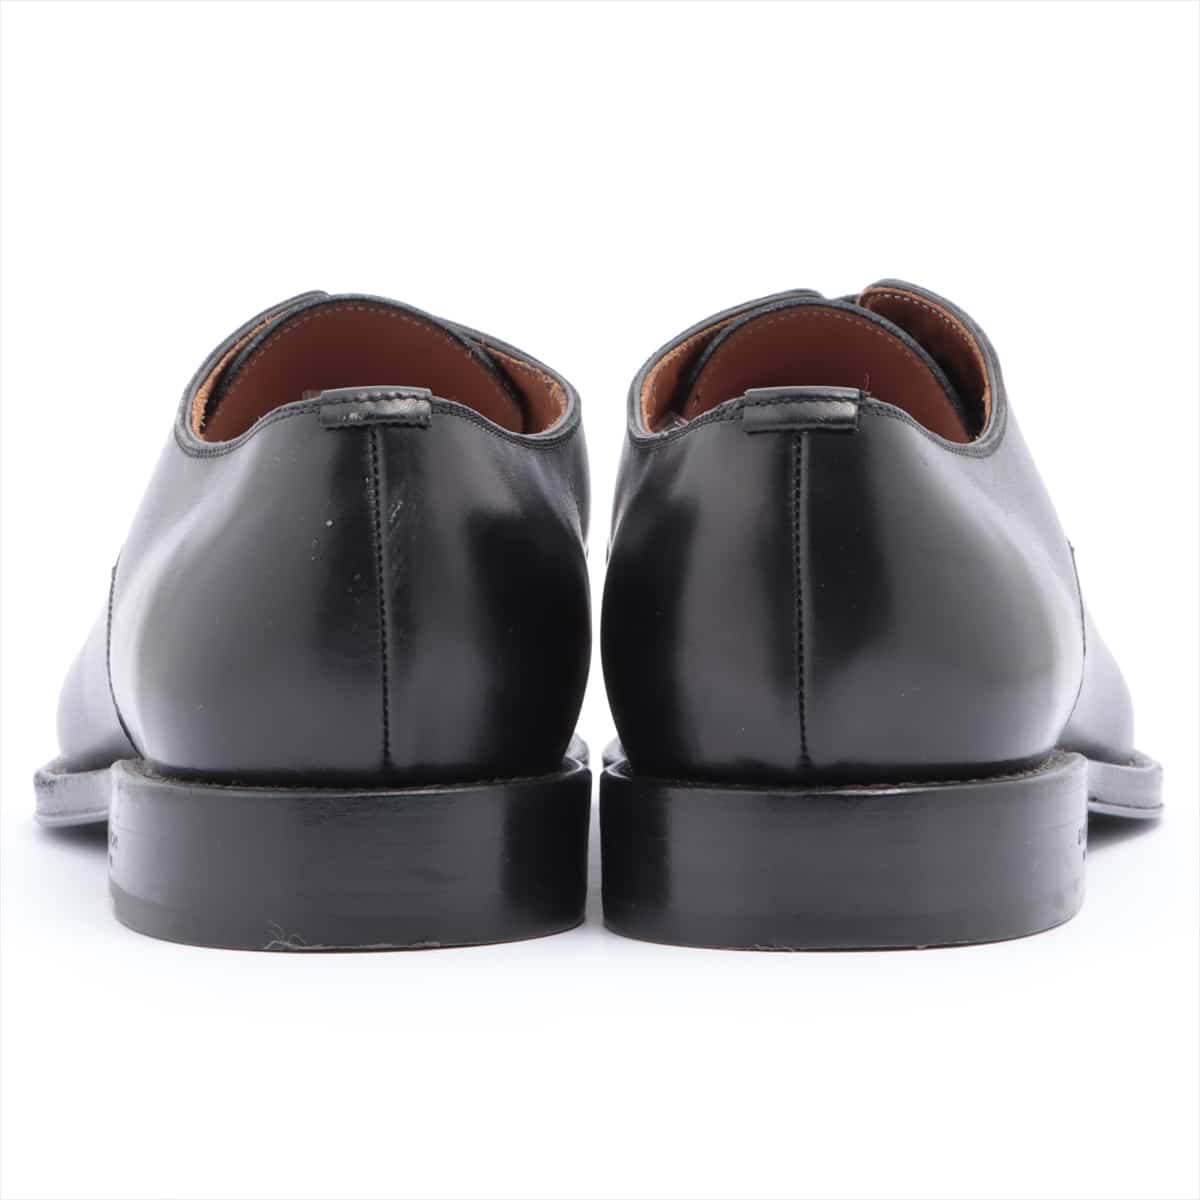 Givenchy Leather Leather shoes 41 Men's Black